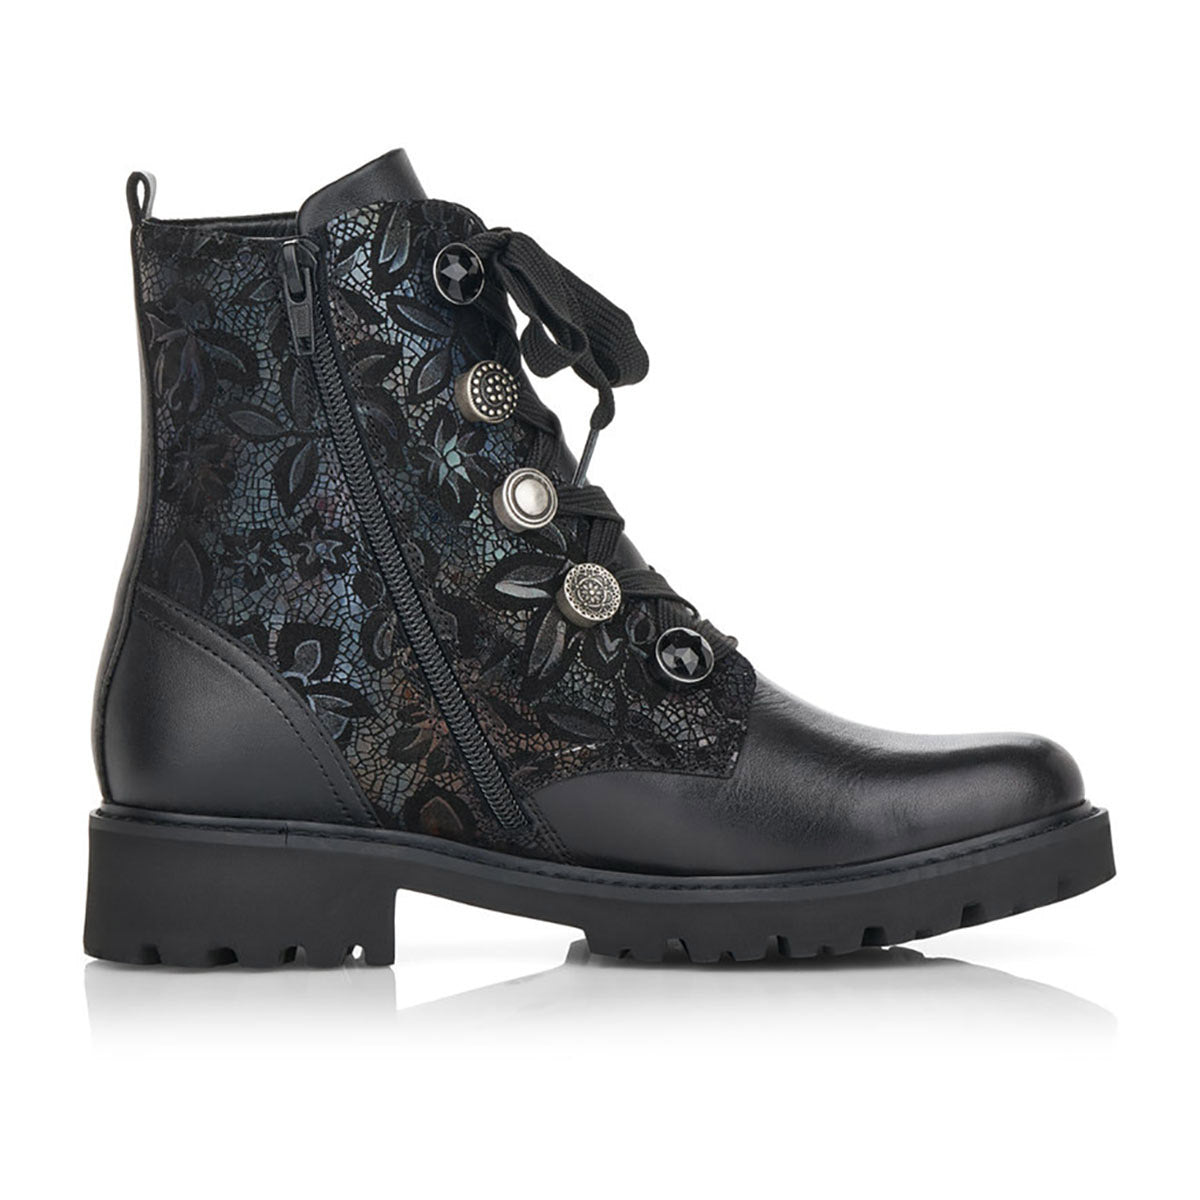 Remonte black floral-embroidered lace-up boot with a zipper closure, featuring decorative metal accents, and part of the Remonte D8677 women&#39;s boots collection.